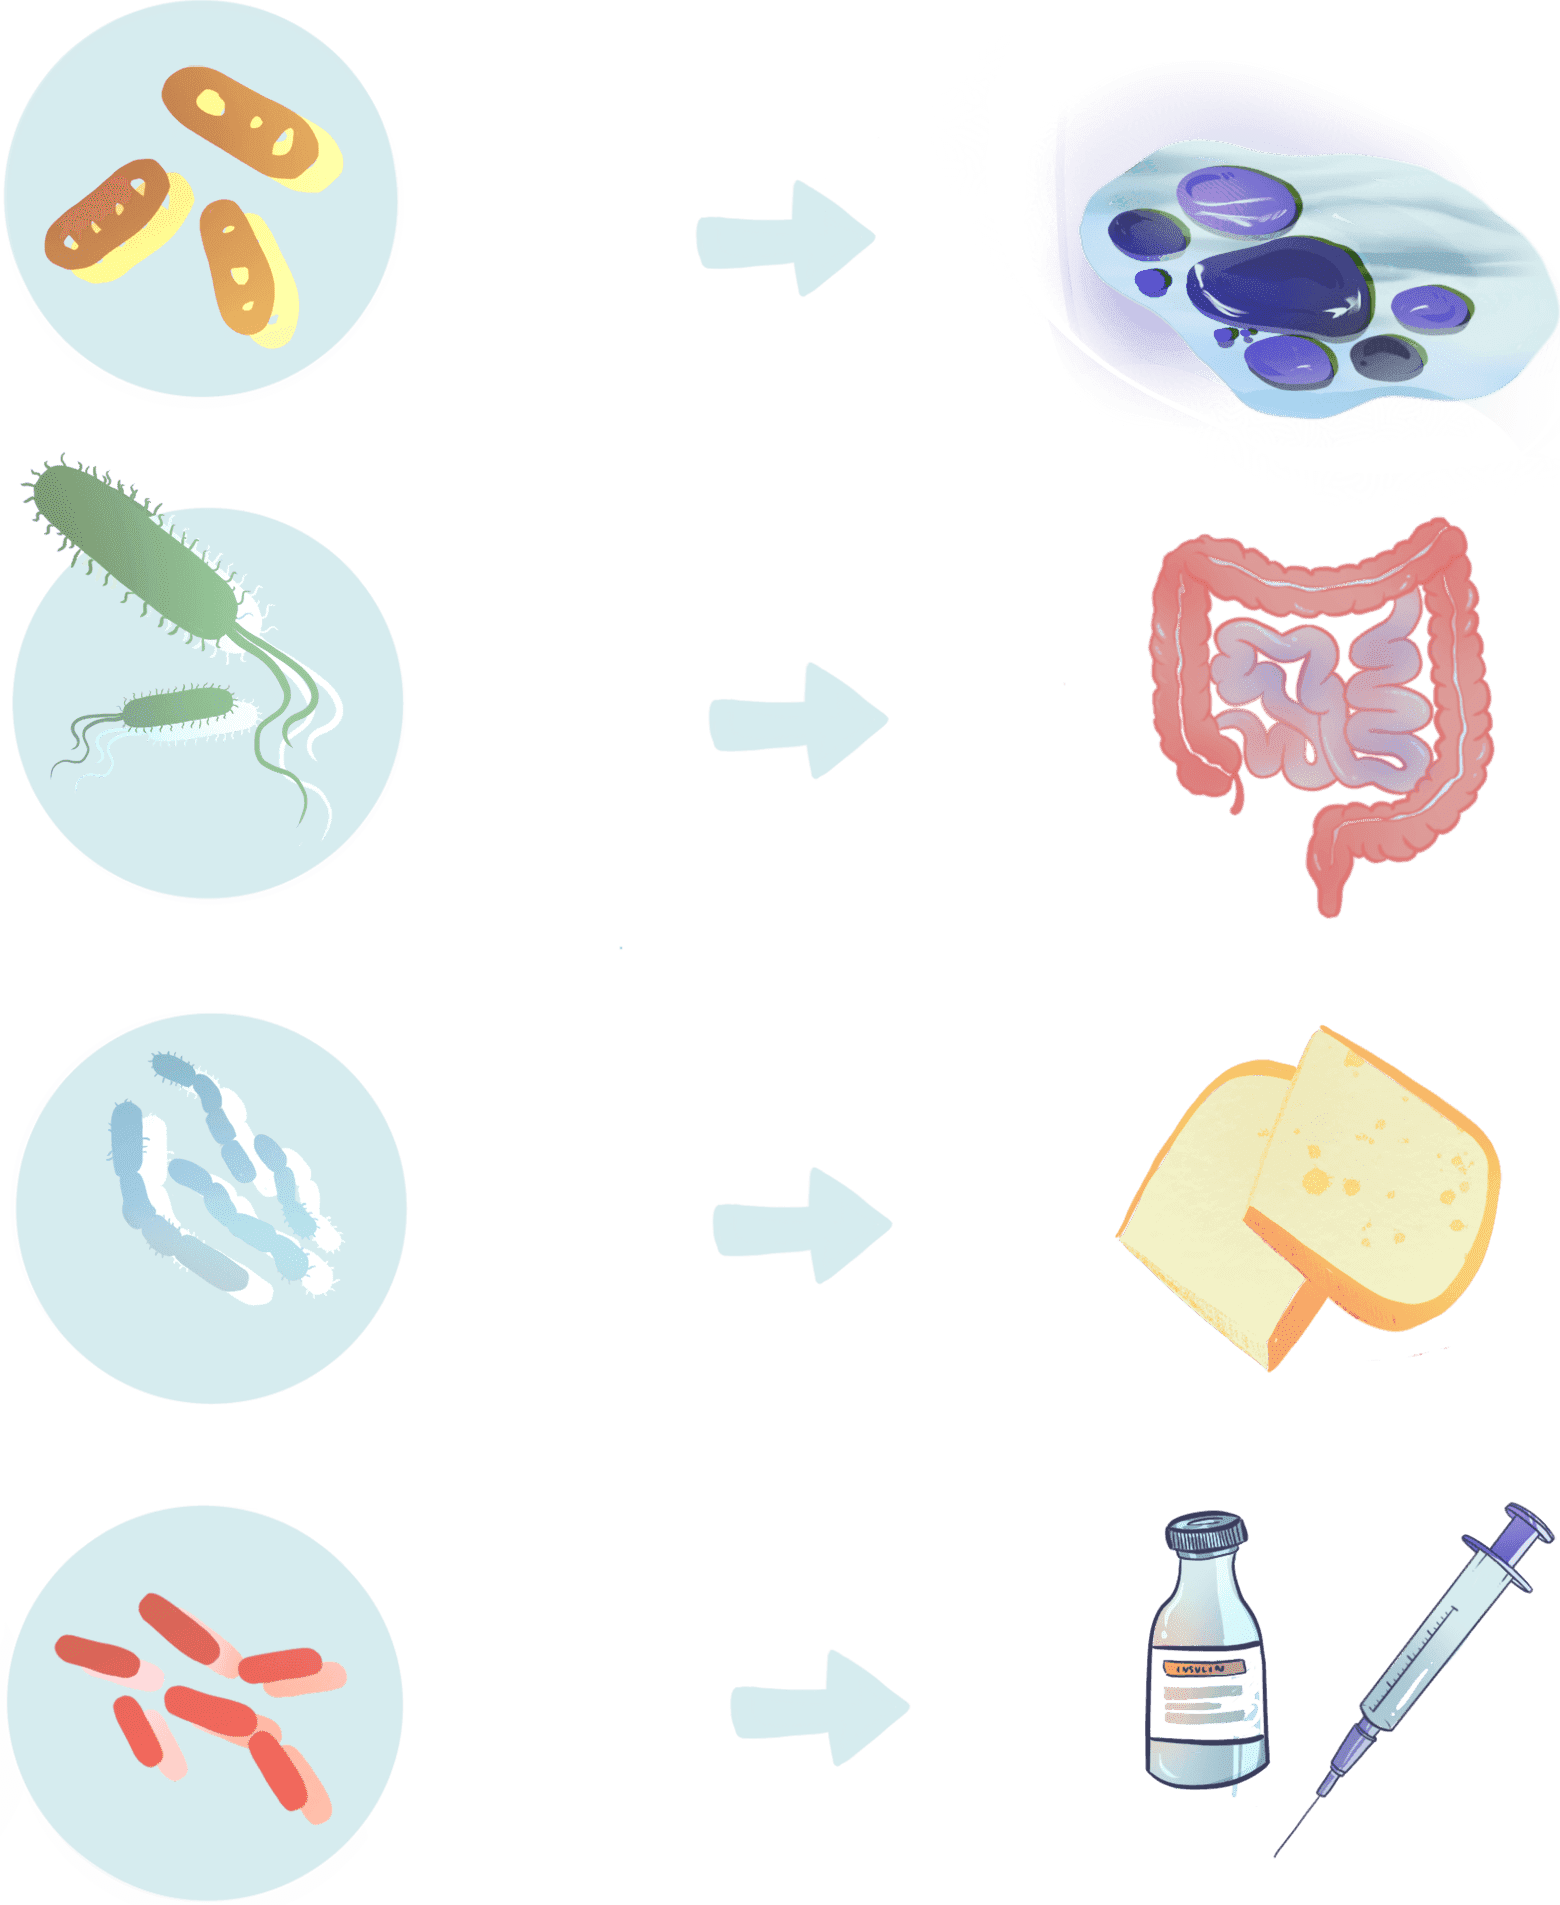 Illustration of microorganisms next to processes they are crucial to: cleaning up oil spills, digestion, making cheese, and making insulin